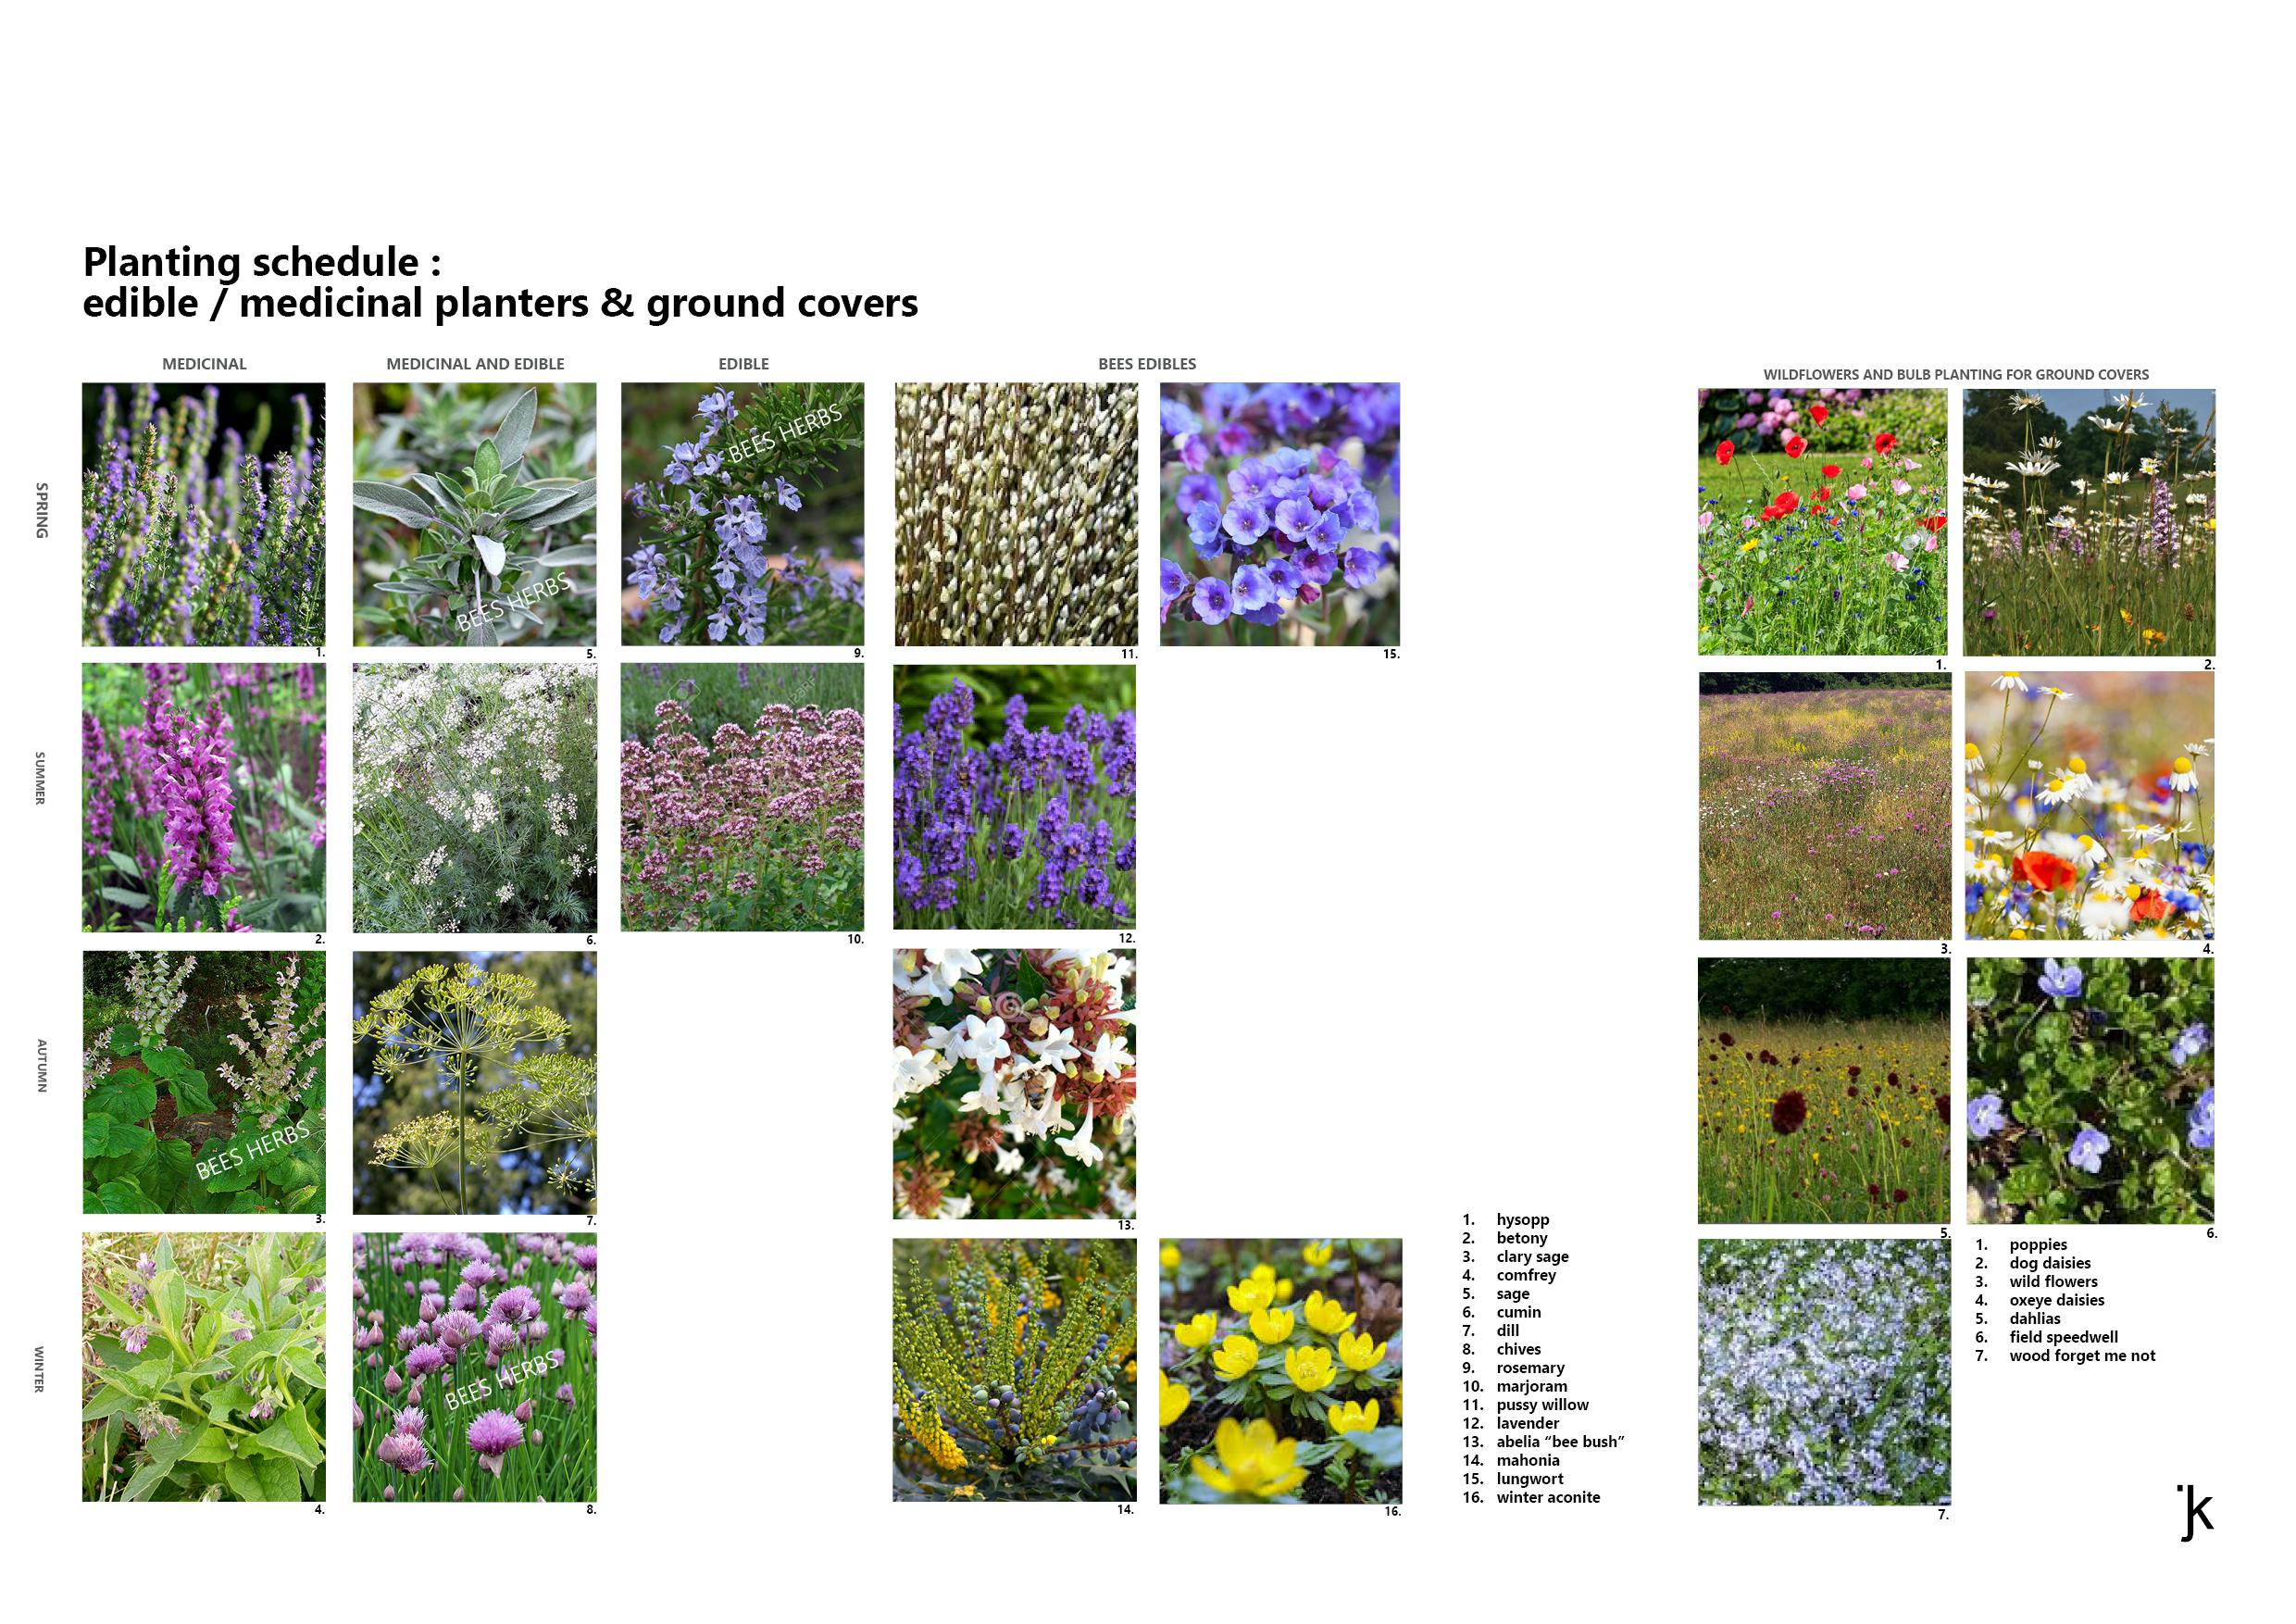 proposed planting schedule